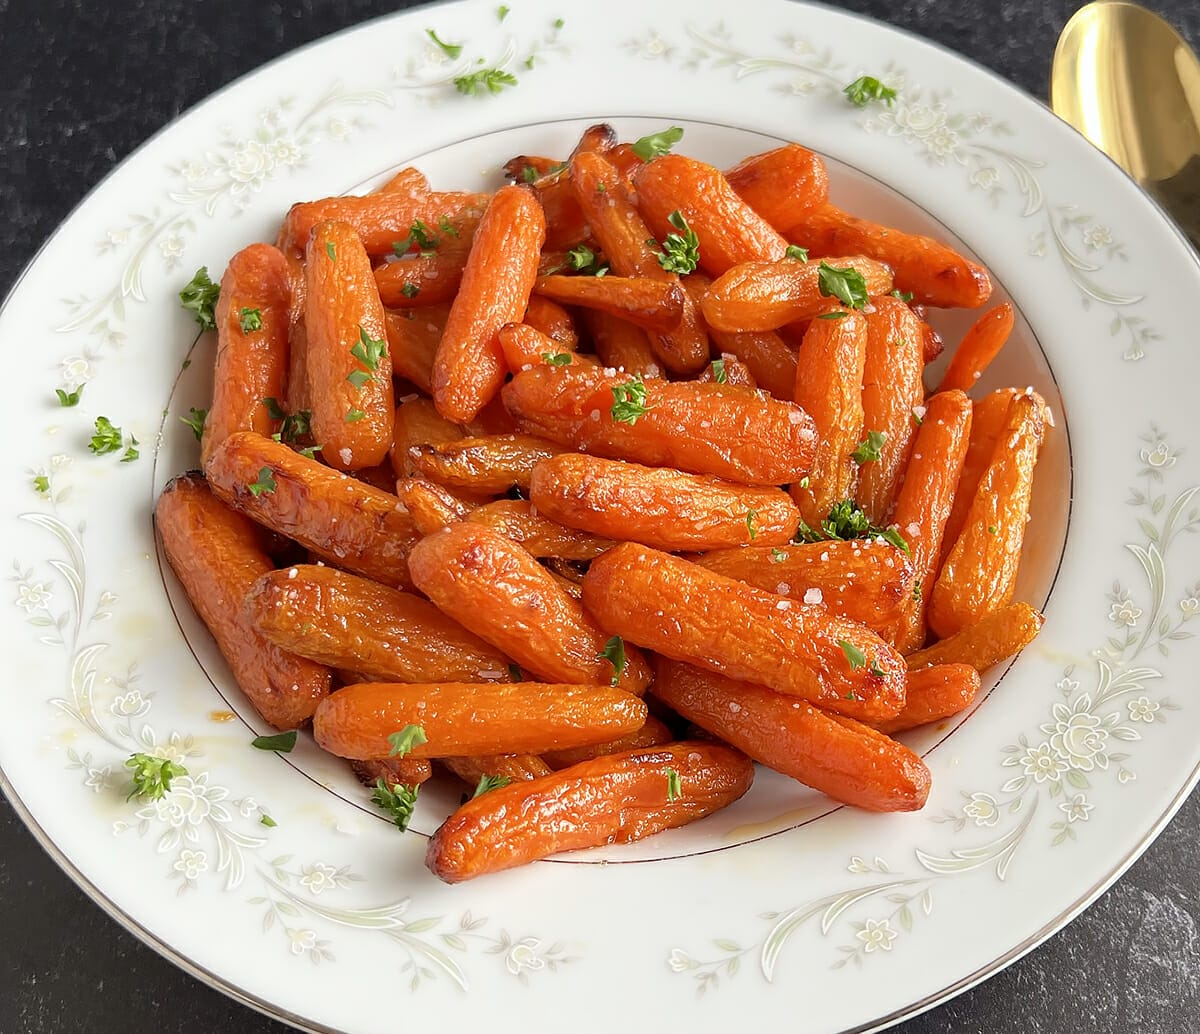 A bag of baby carrots to make in an air fryer